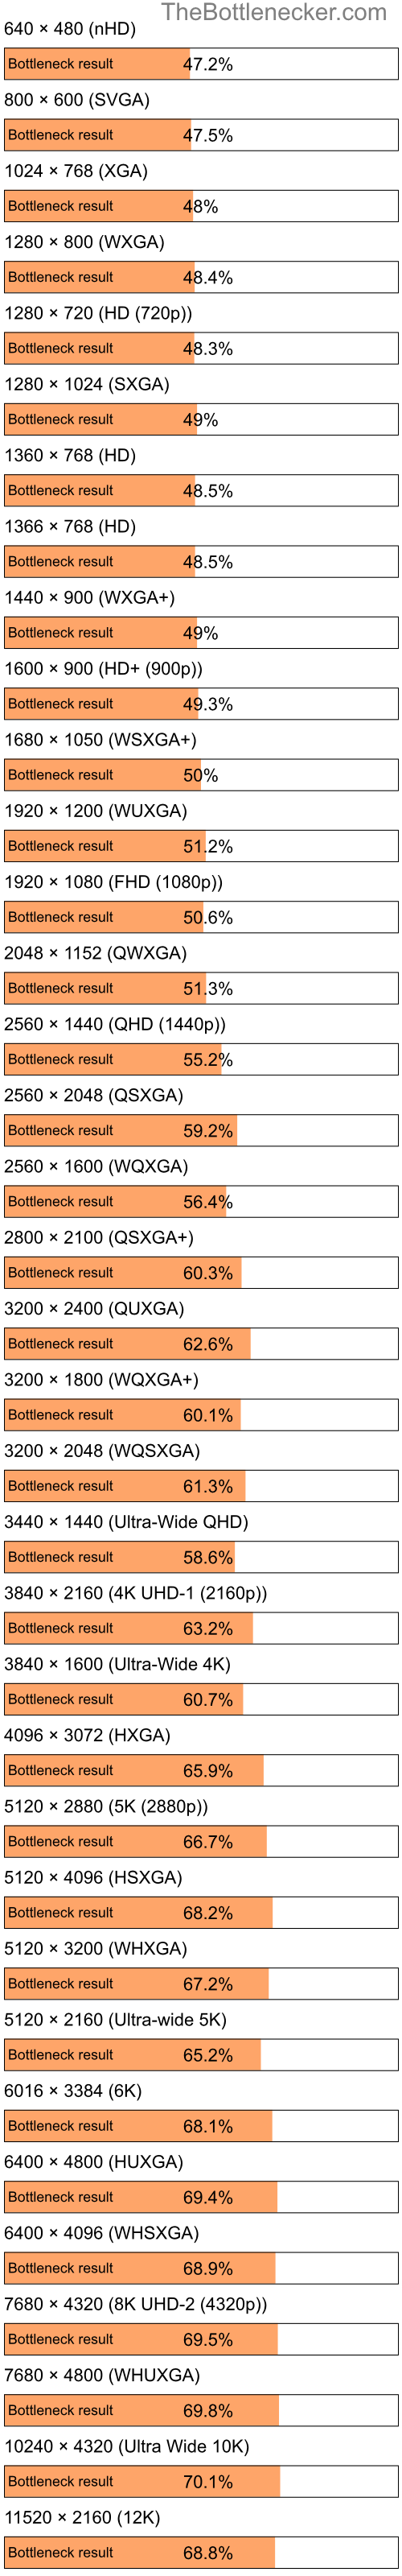 Bottleneck results by resolution for Intel Pentium 4 and NVIDIA GeForce 9300 GS in Processor Intense Tasks